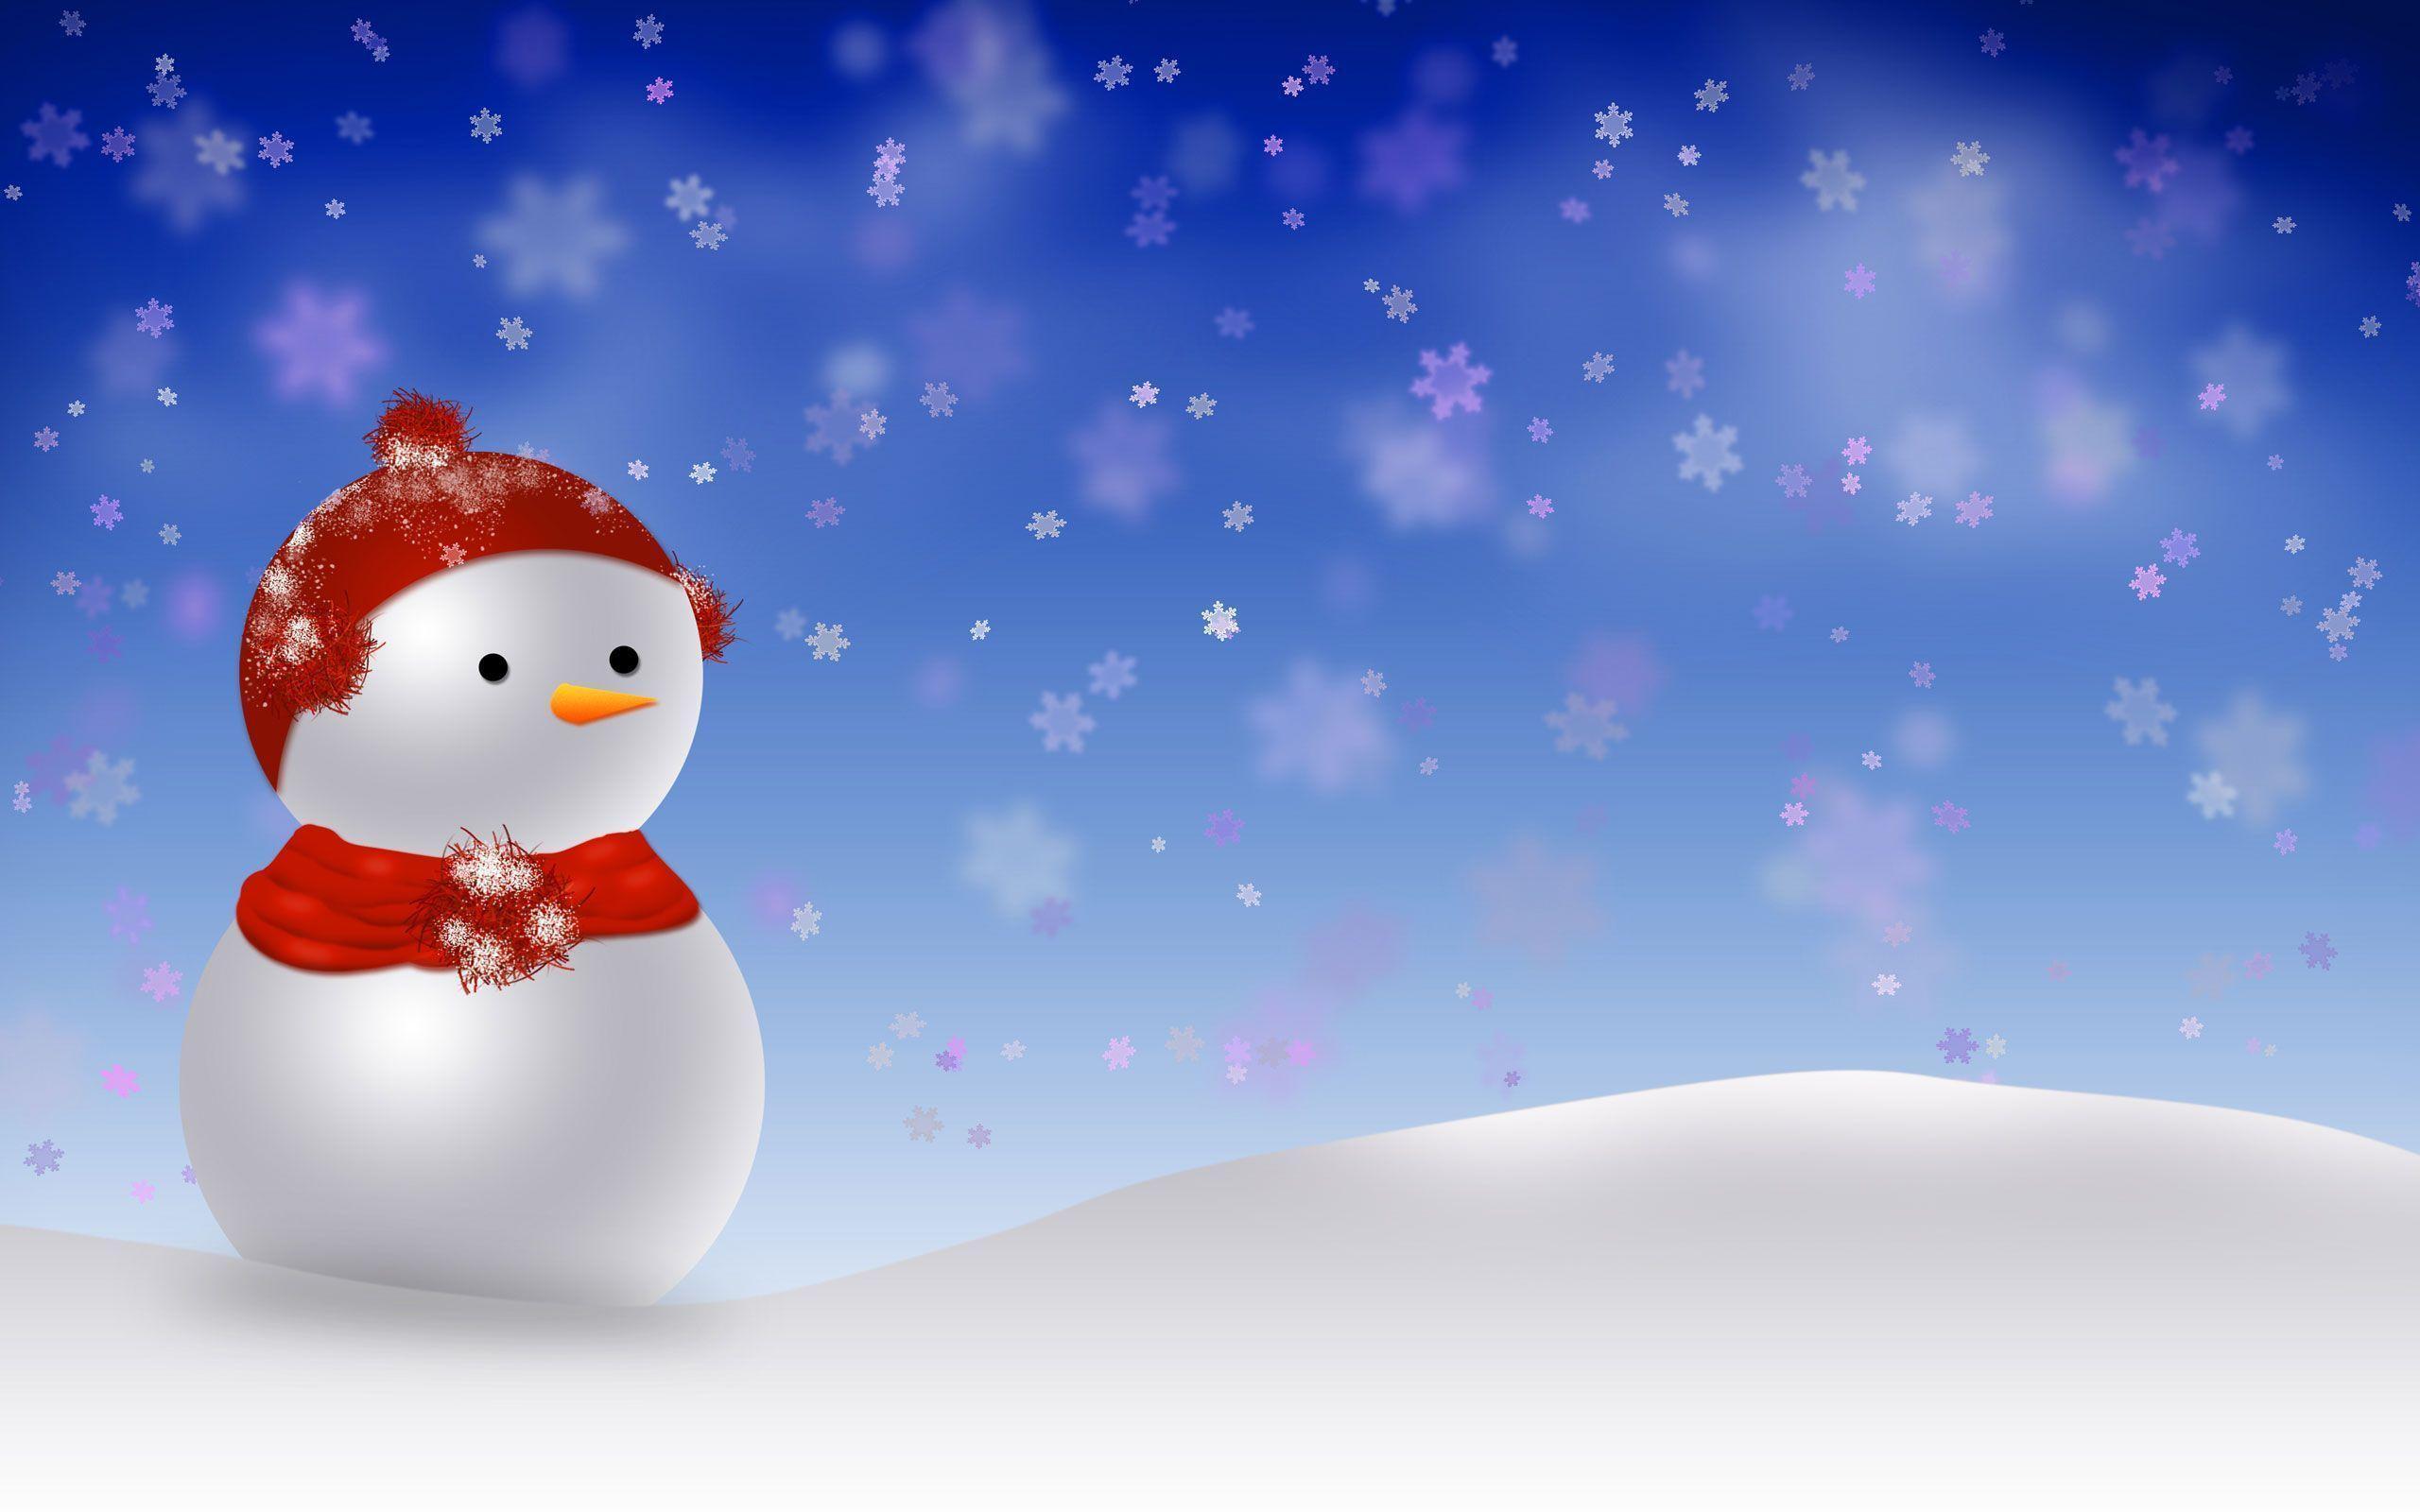 Wallpapers For > Cute Christmas Wallpapers Hd